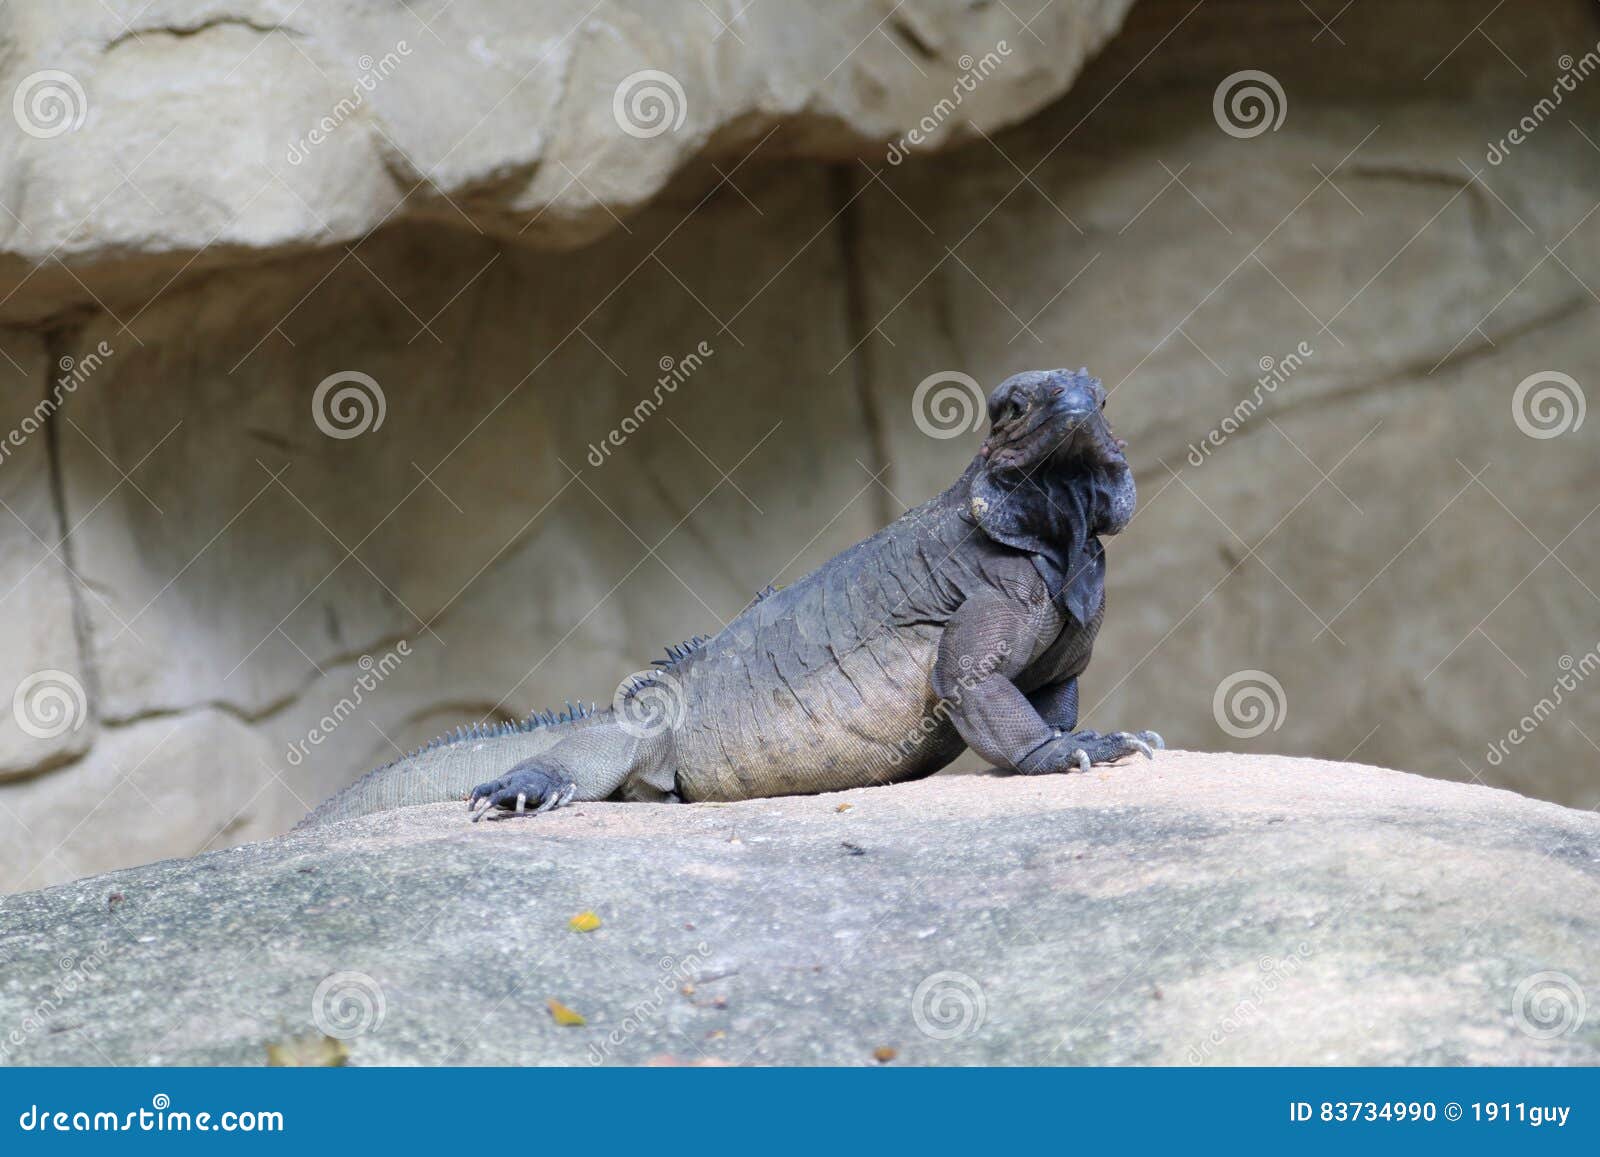 Horned Lizard 3 stock photo. Image of threatening, scale ...